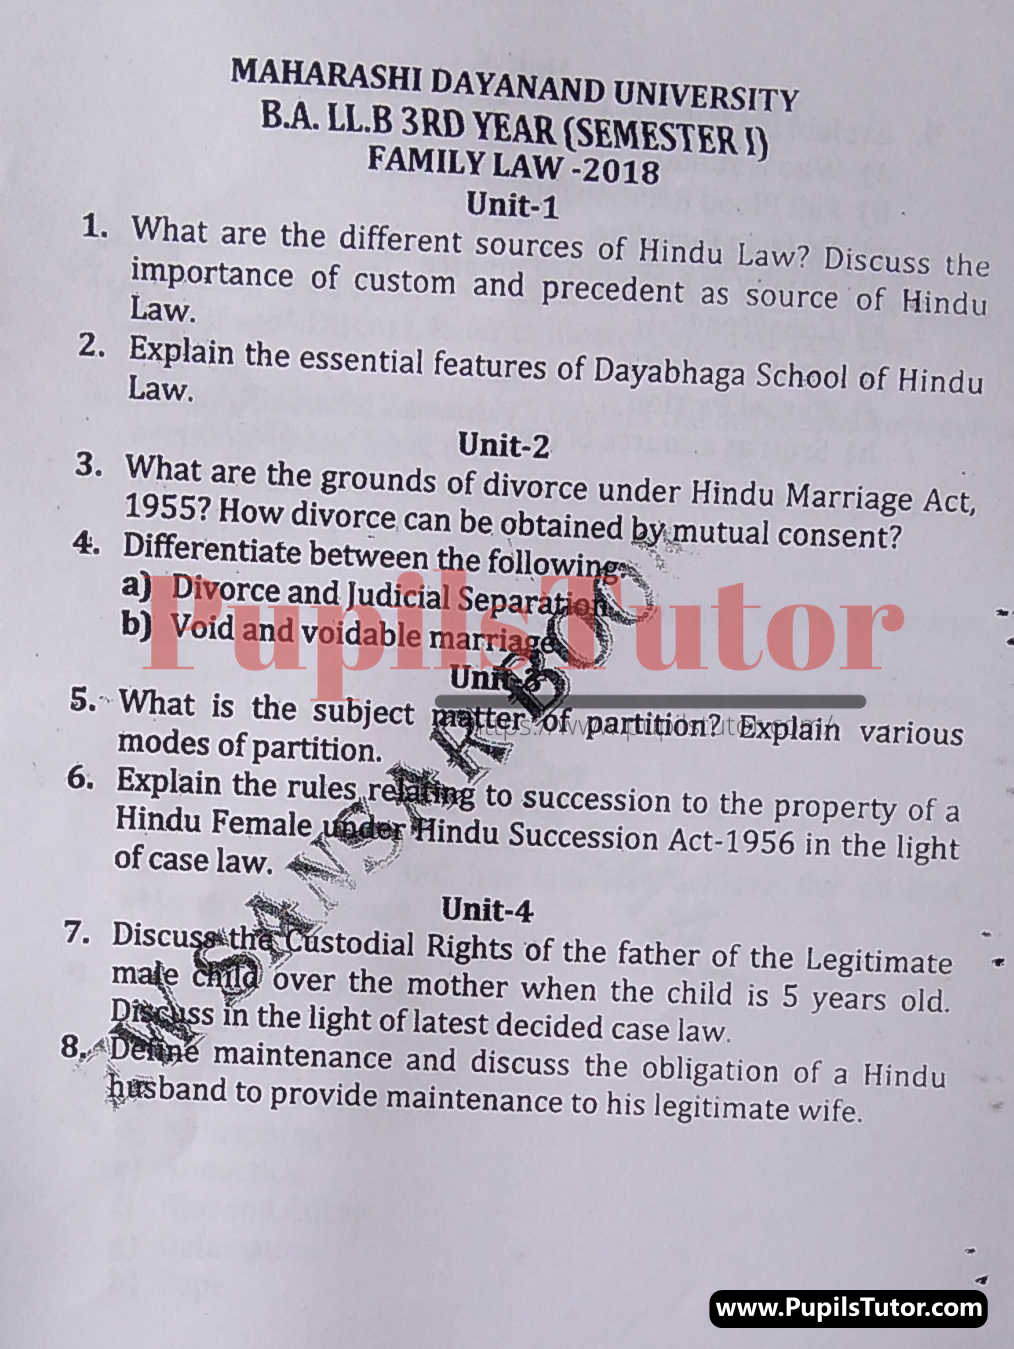 MDU (Maharshi Dayanand University, Rohtak Haryana) LLB Regular Exam (Hons.) First Semester Previous Year Family Law Question Paper For 2018 Exam (Question Paper Page 1) - pupilstutor.com